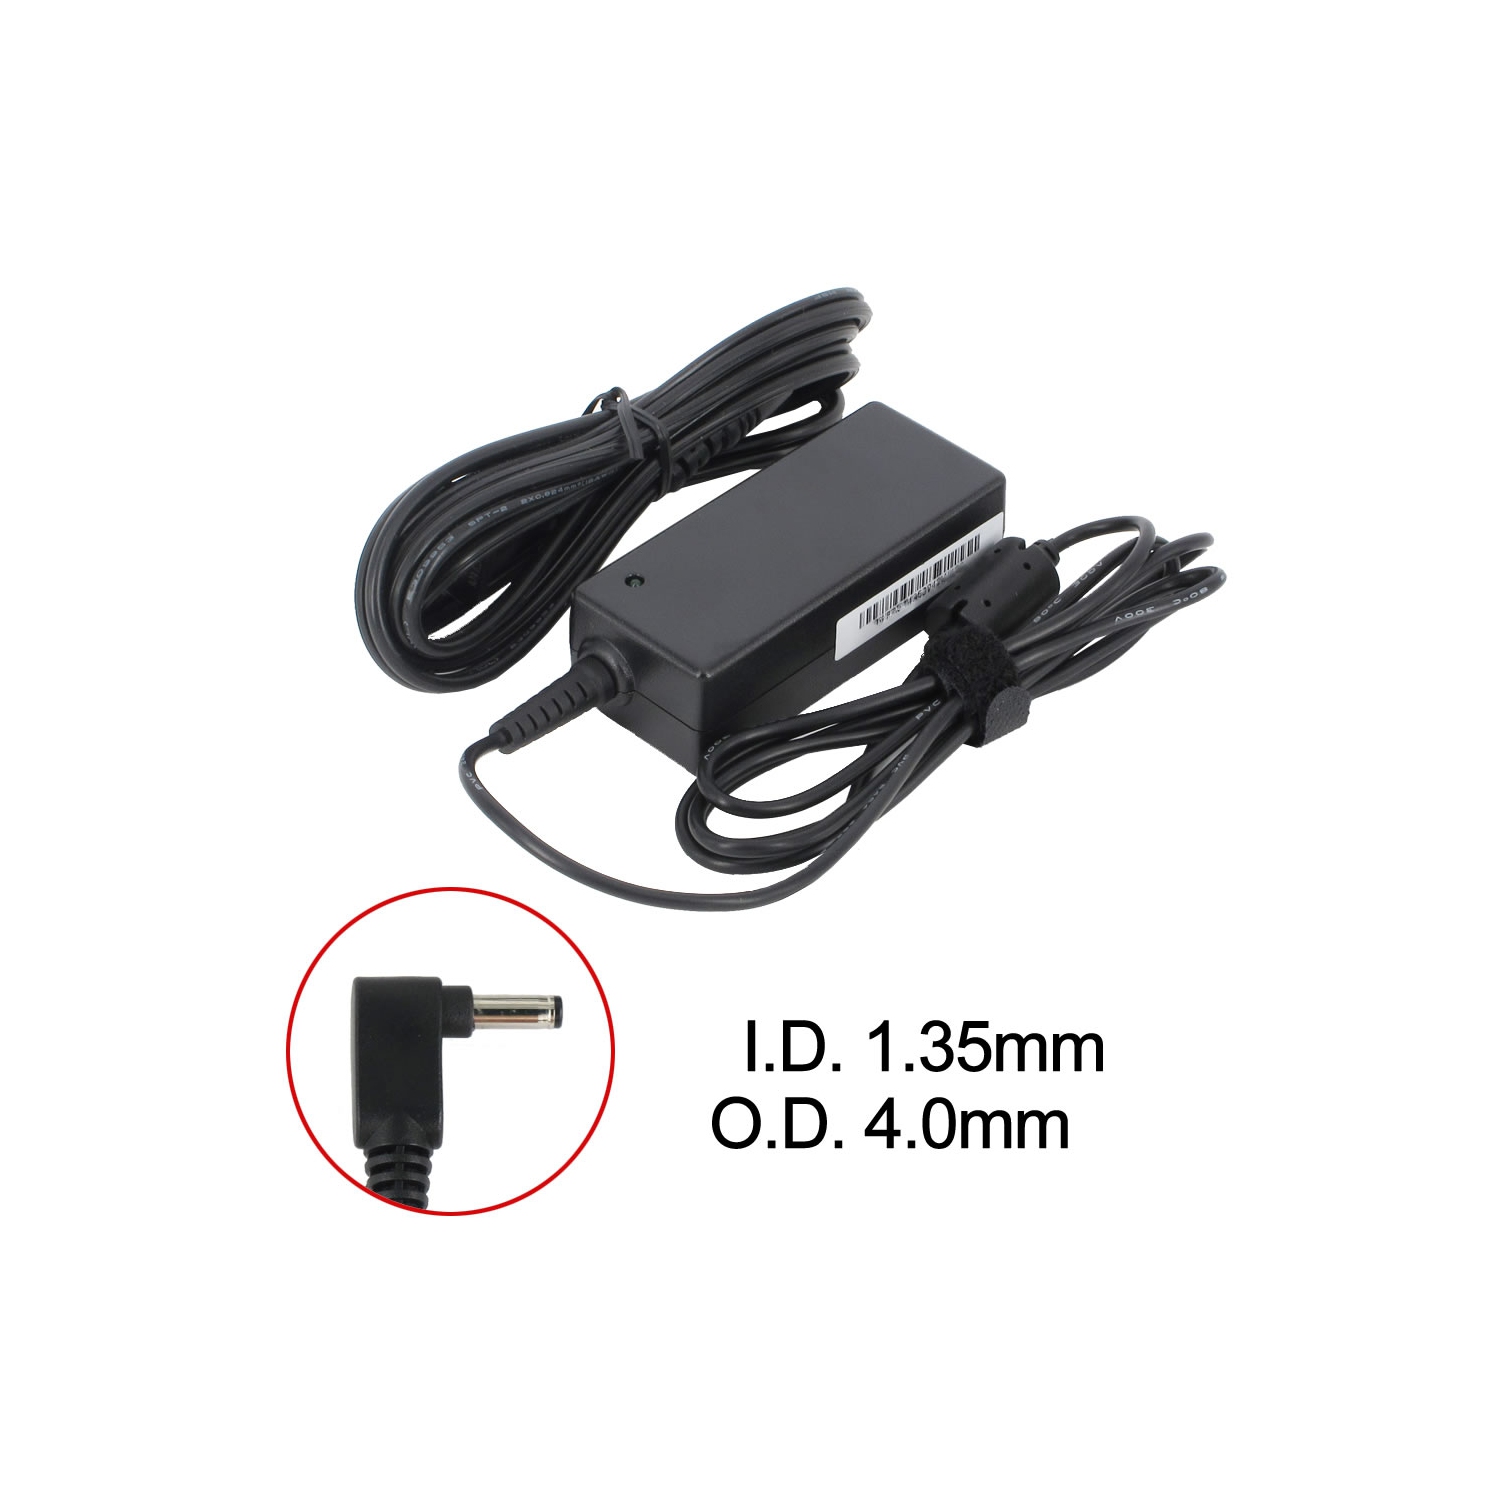 BattDepot: New Laptop AC Adapter for Asus UX305UA-1A, 0A001-00230300, 0A001-00233100, EXA1206CH, W15-065N1A